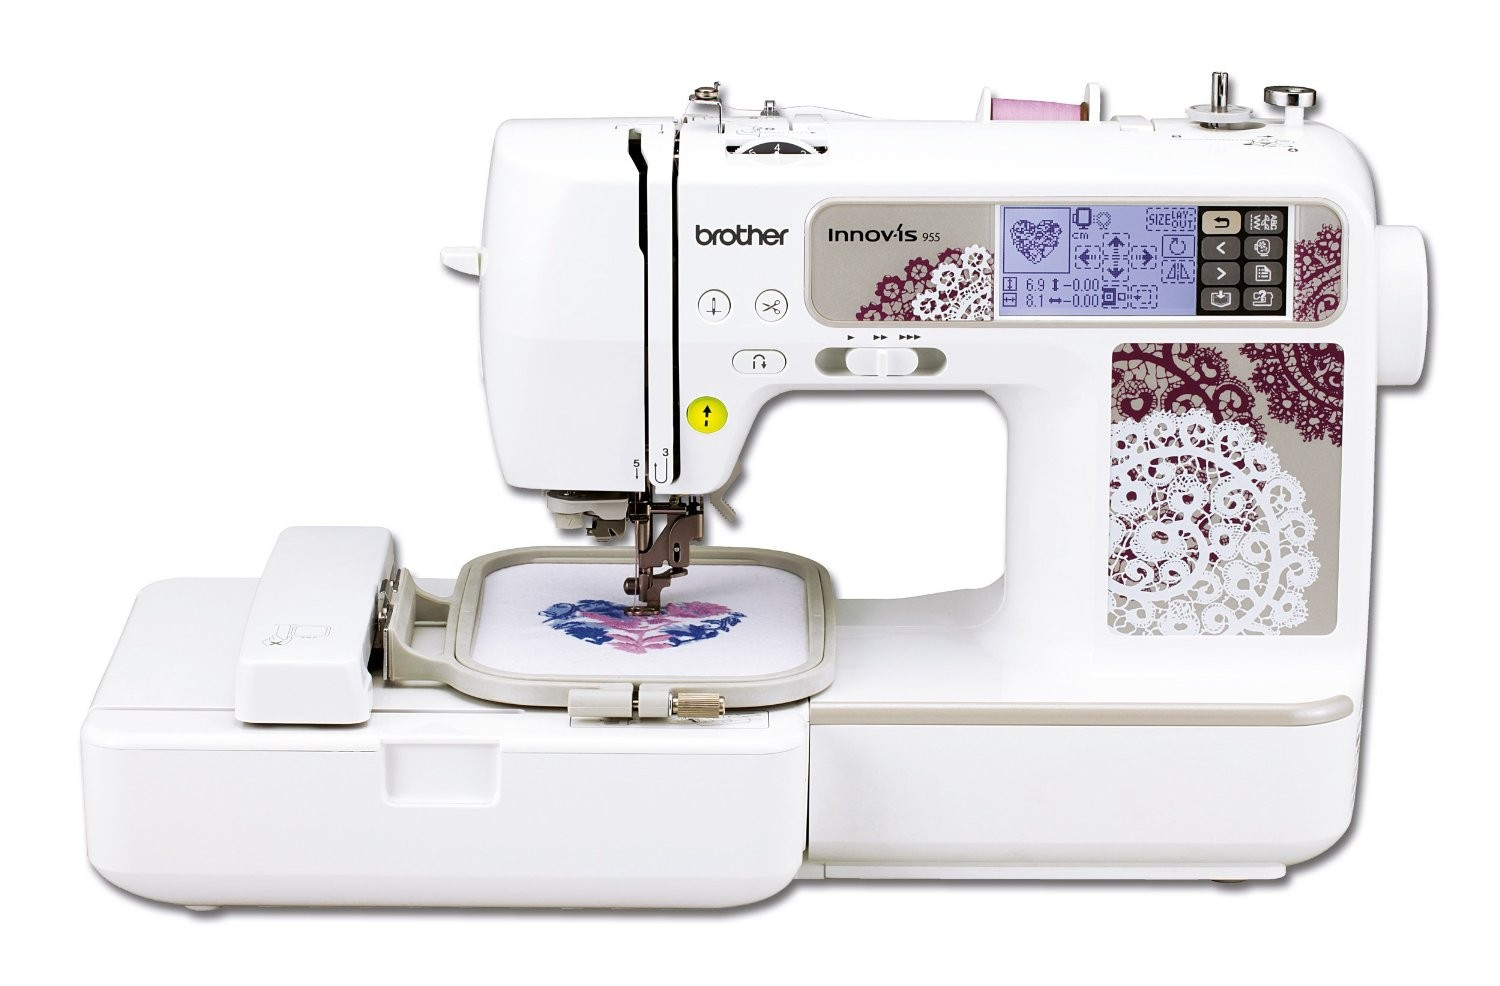 Brother Sewing Machine Embroidery Patterns Mesin Sulam Brother Nv950e Brother Nv950e Embroidery Machine Malaysia